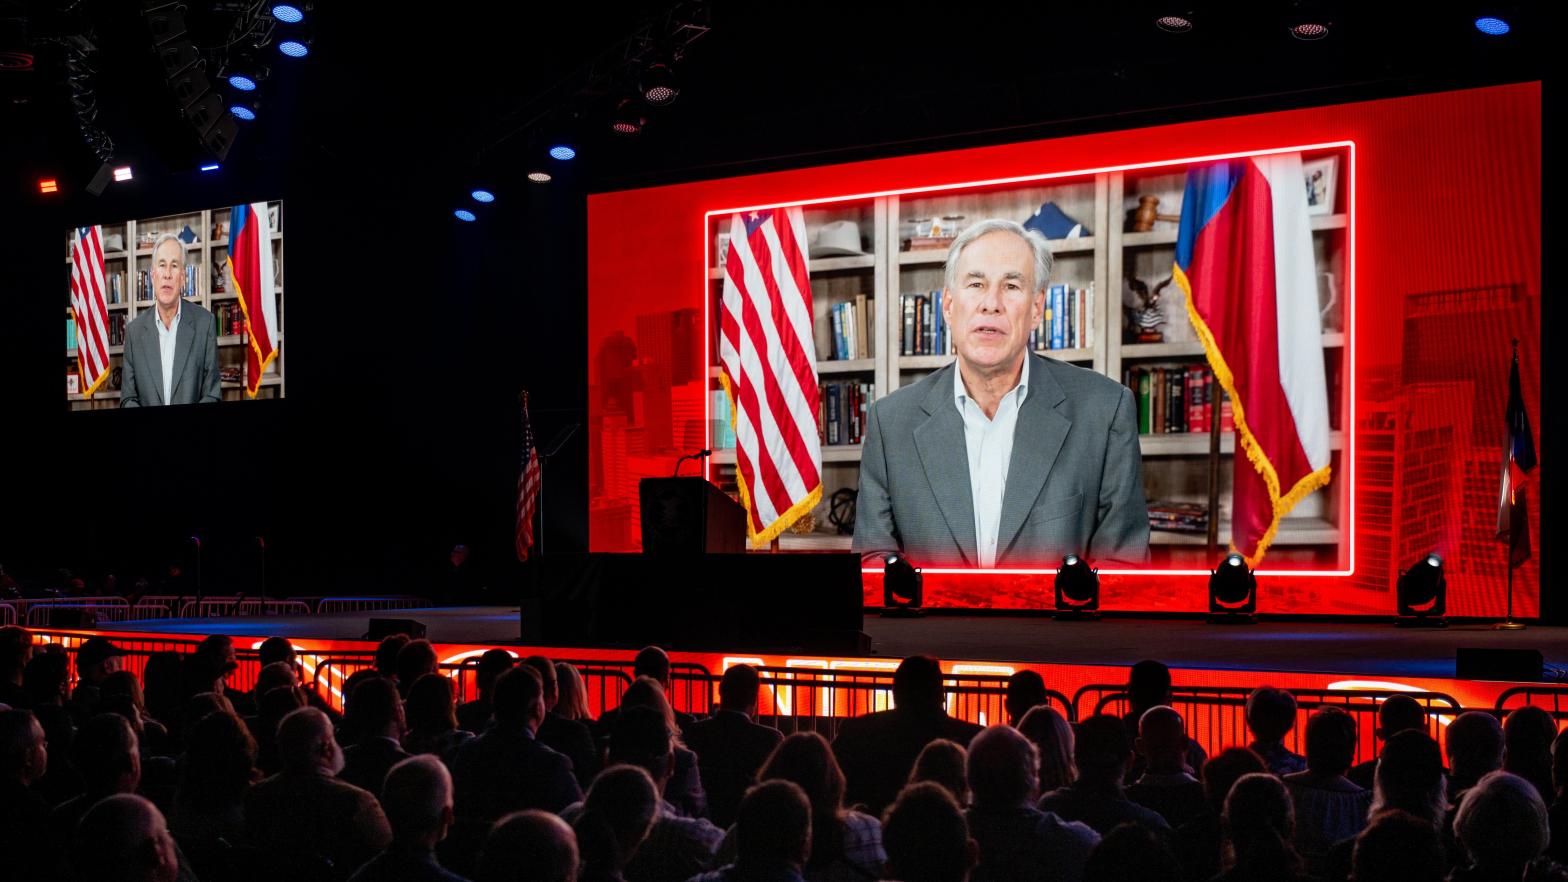 A video recording of Texas Gov. Greg Abbott plays during the National Rifle Association (NRA) annual convention on May 27, 2022 in Houston, Texas. The annual event came days after the mass shooting in Uvalde, Texas left 19 children and 2 adults dead. (Photo: Brandon Bell, Getty Images)